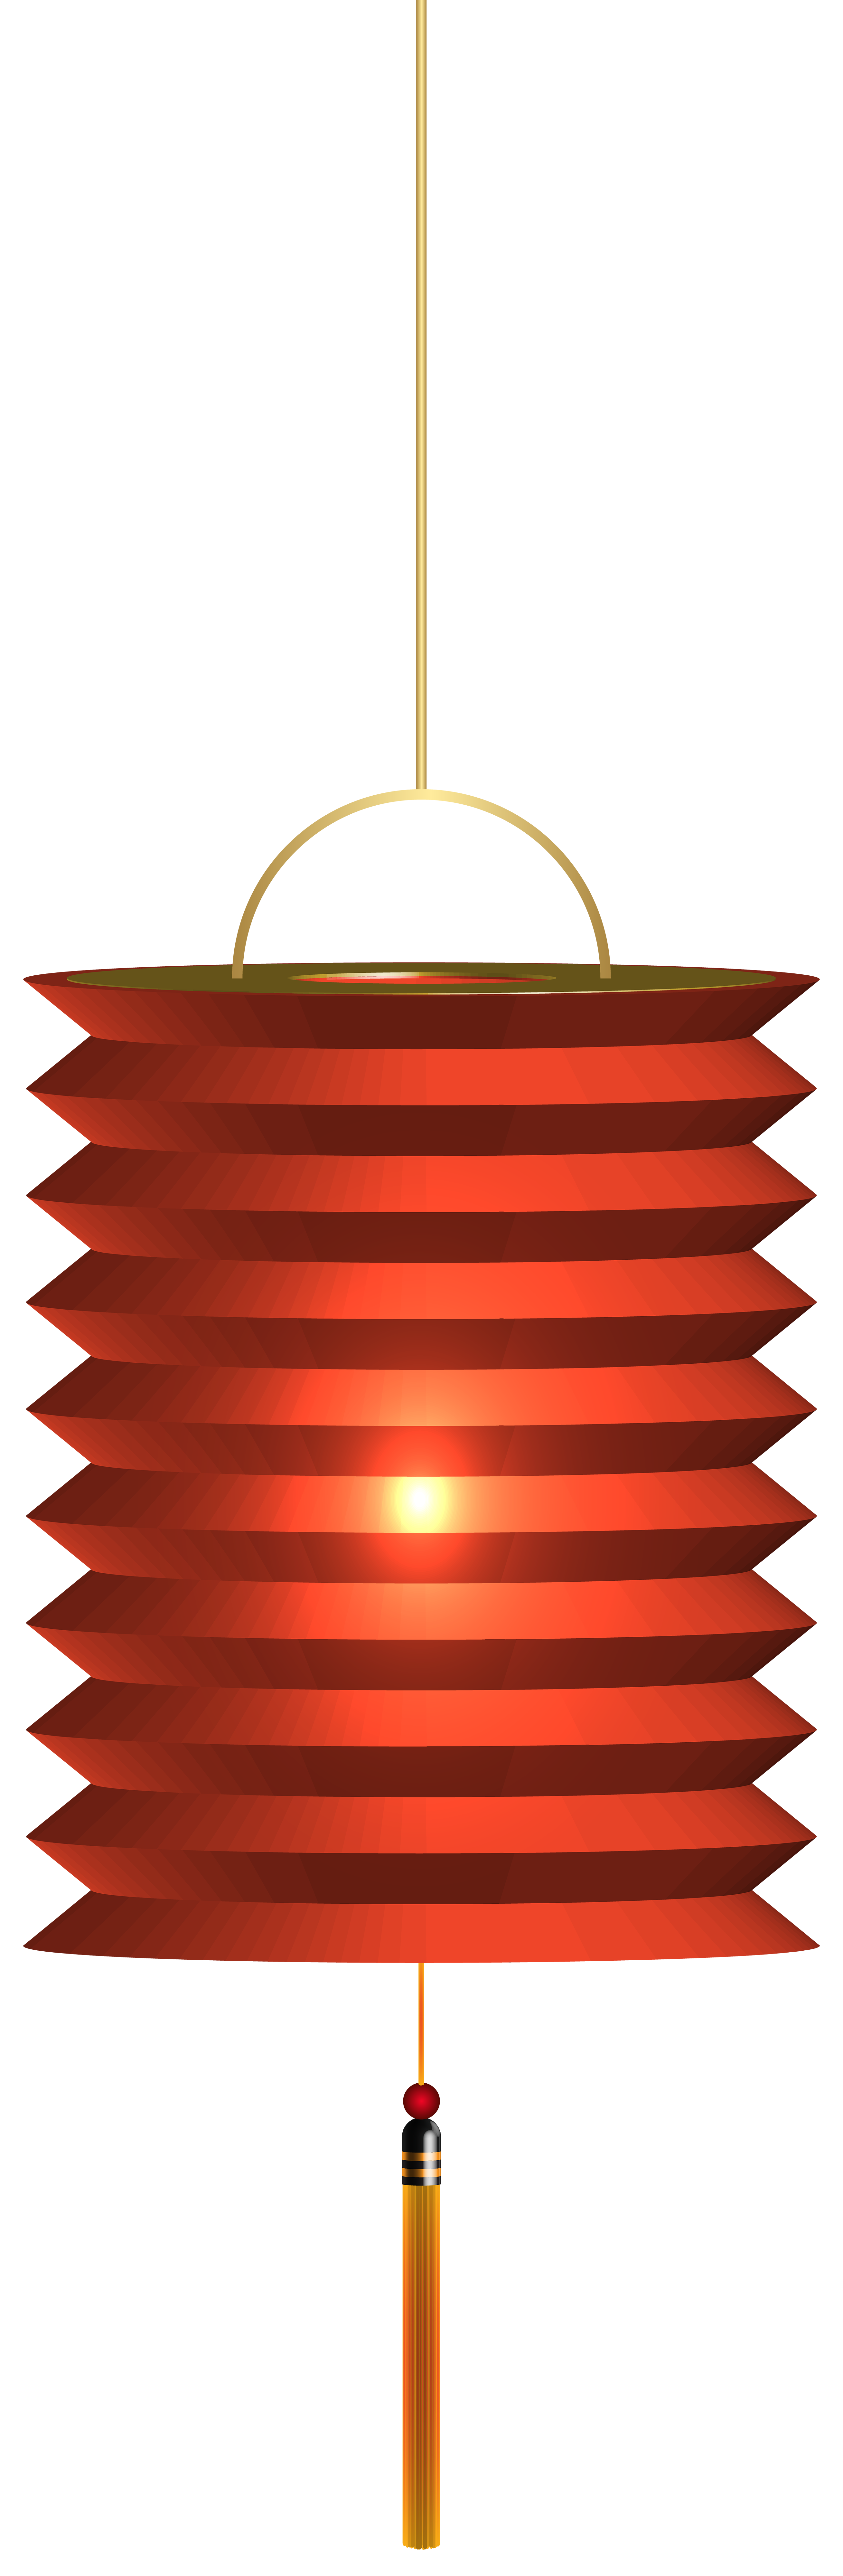 Hand clipart lantern. Chinese red paper png